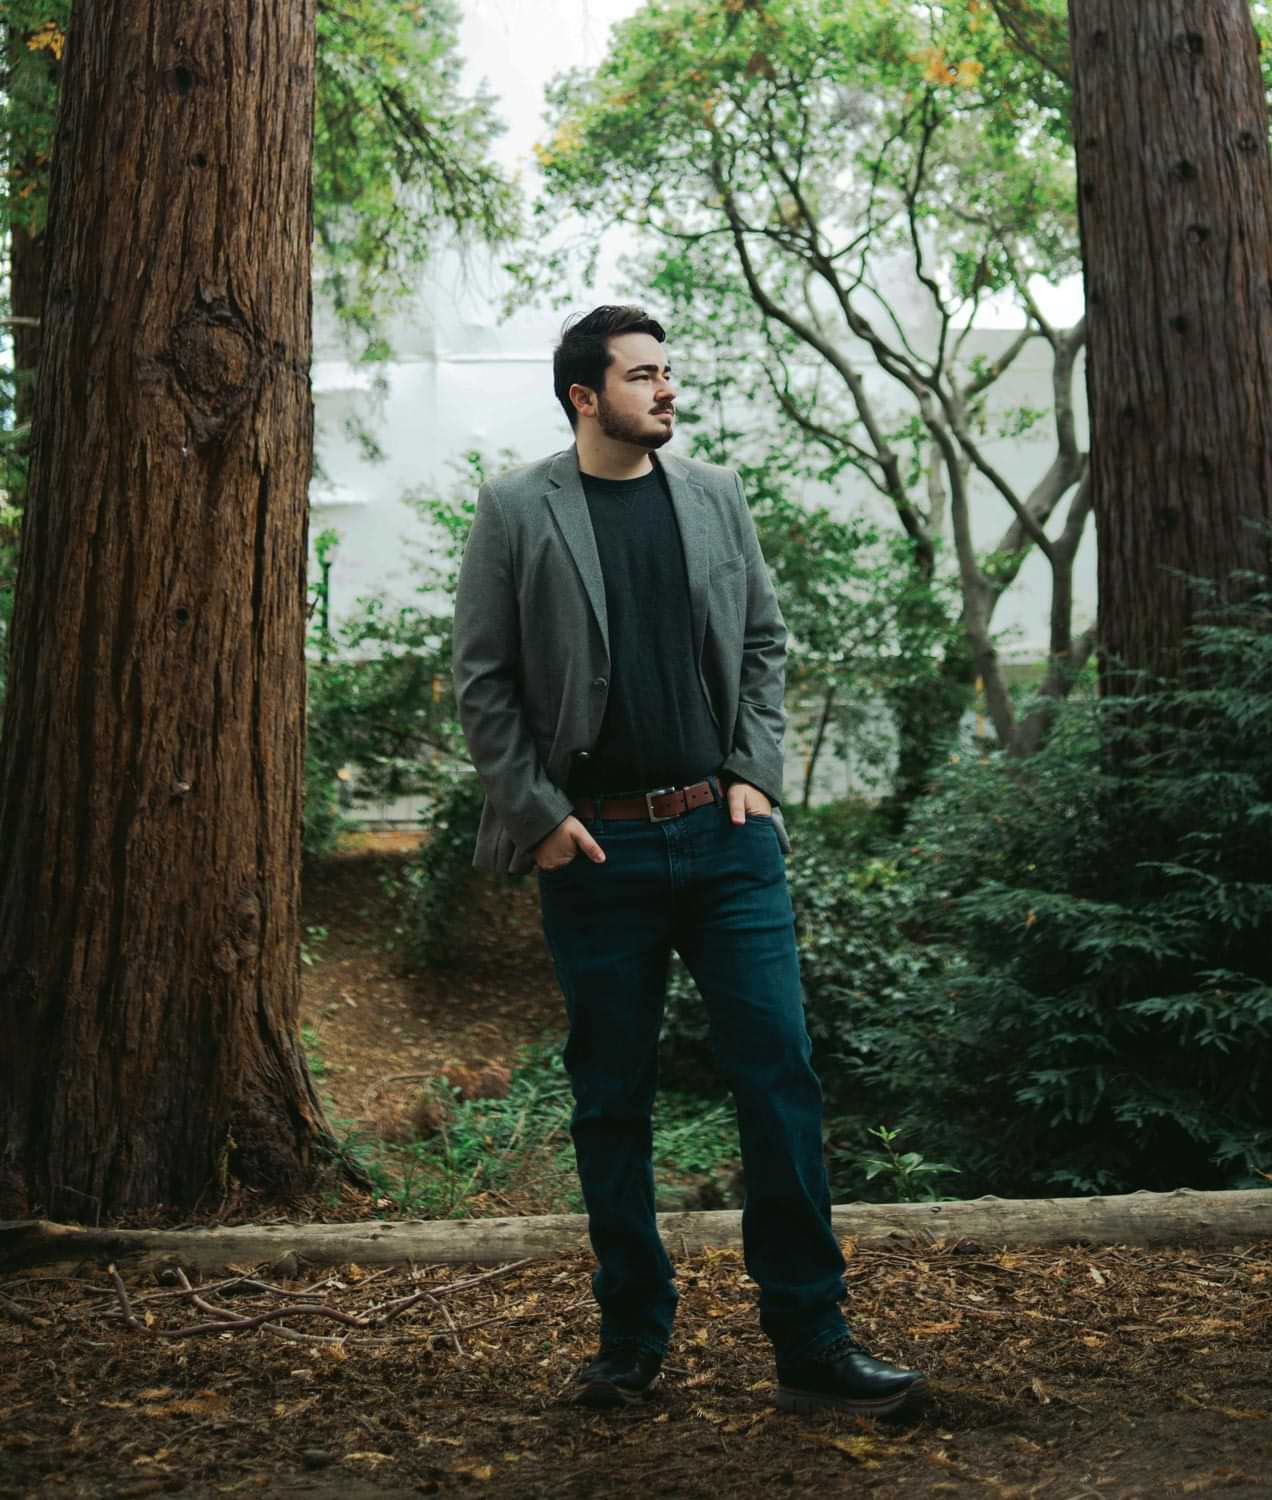 Phillip Gomez pictured standing in a forested area